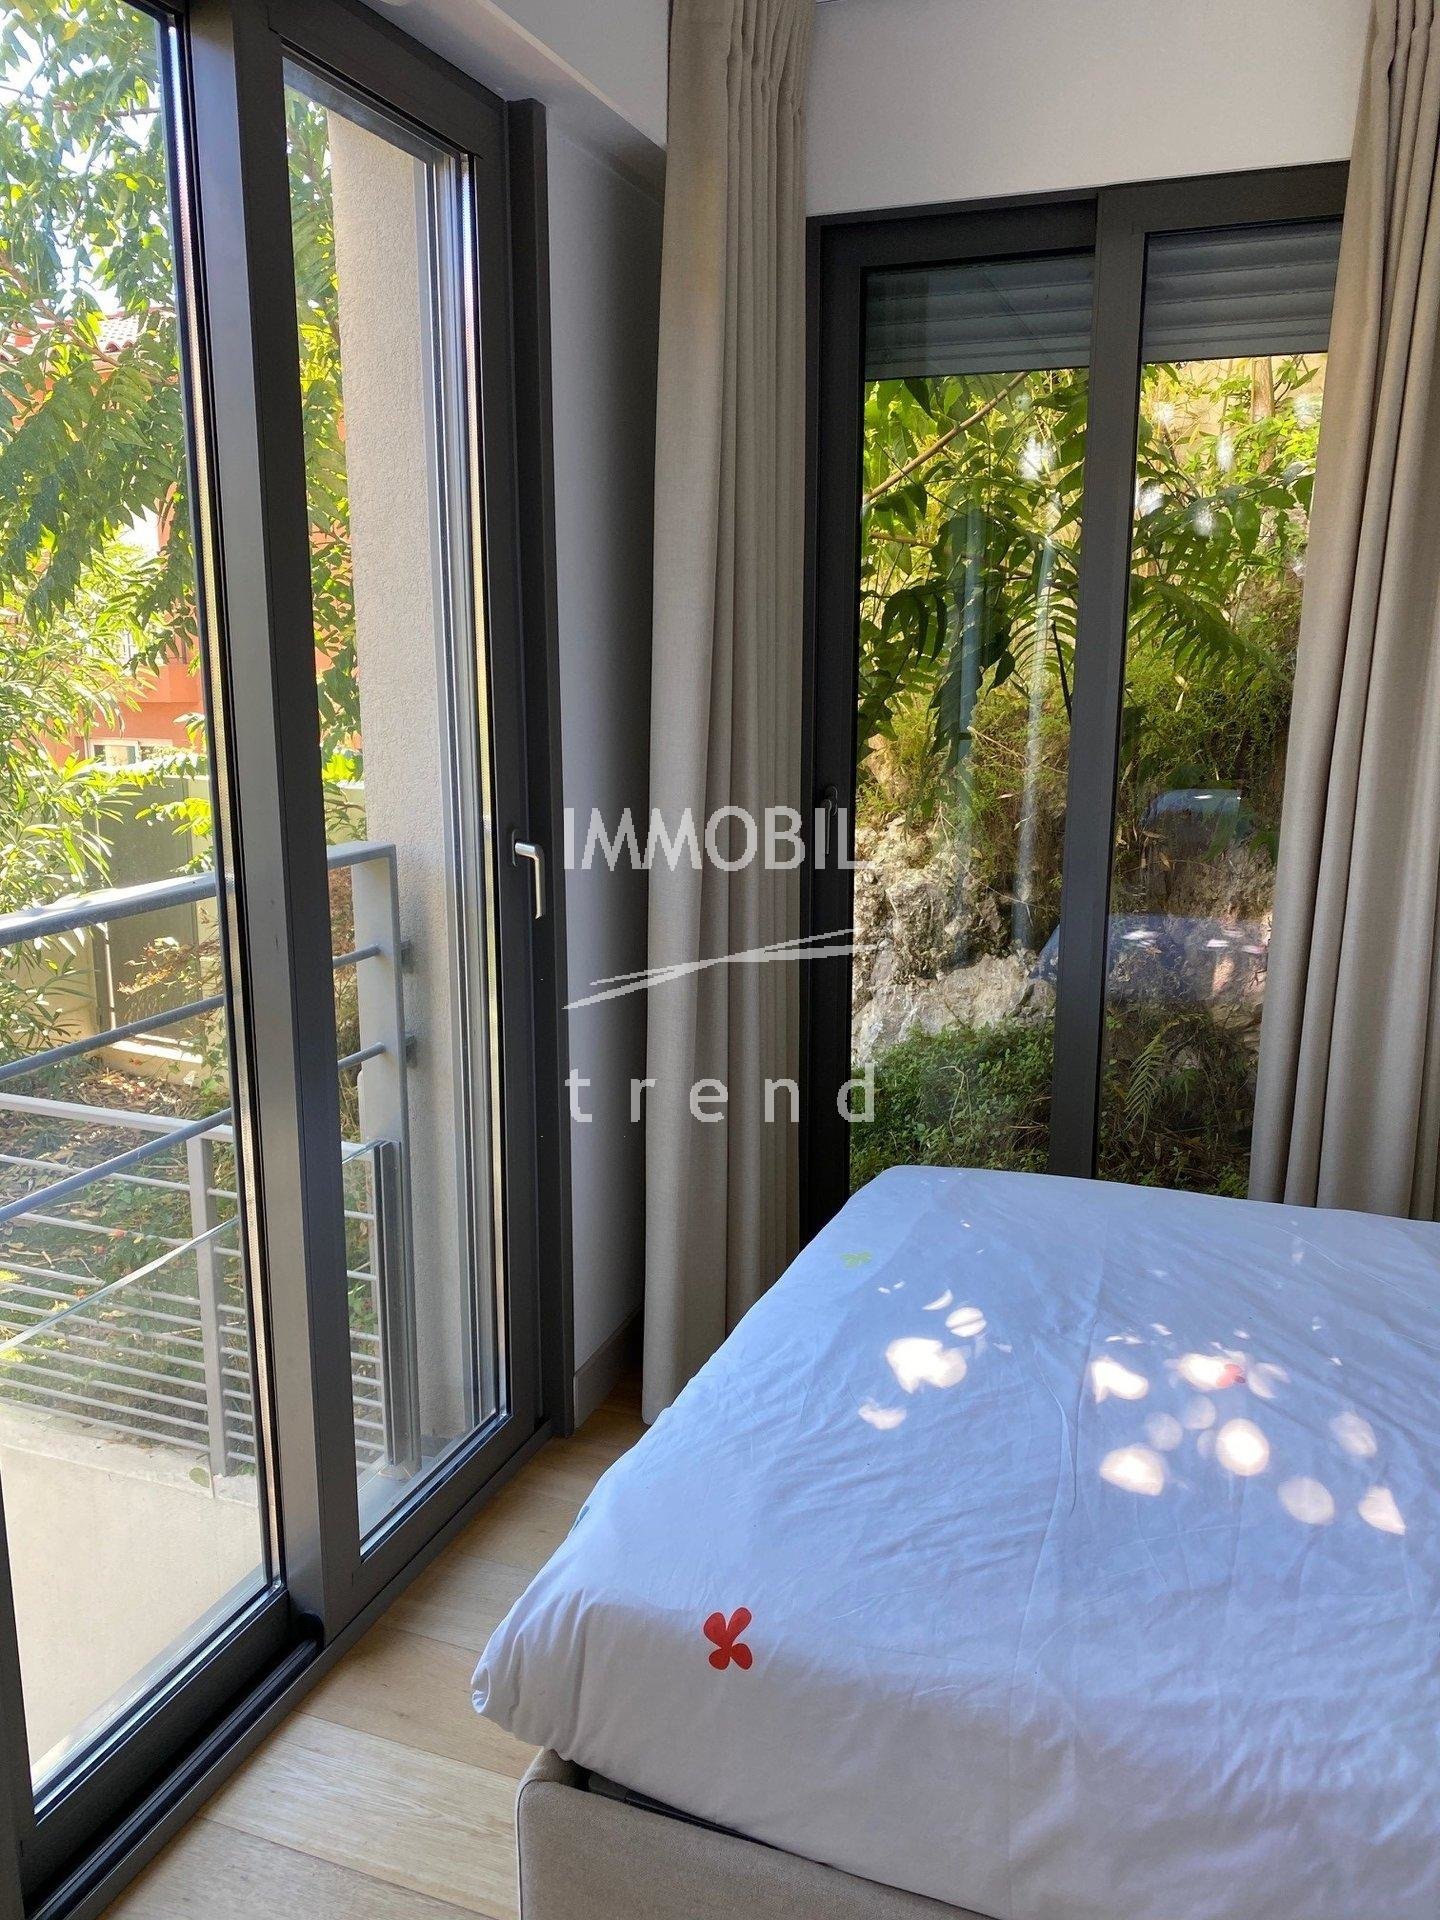 Real estate Beausoleil - For rental, close to Monaco, two bedroom apartment with garden and parking space